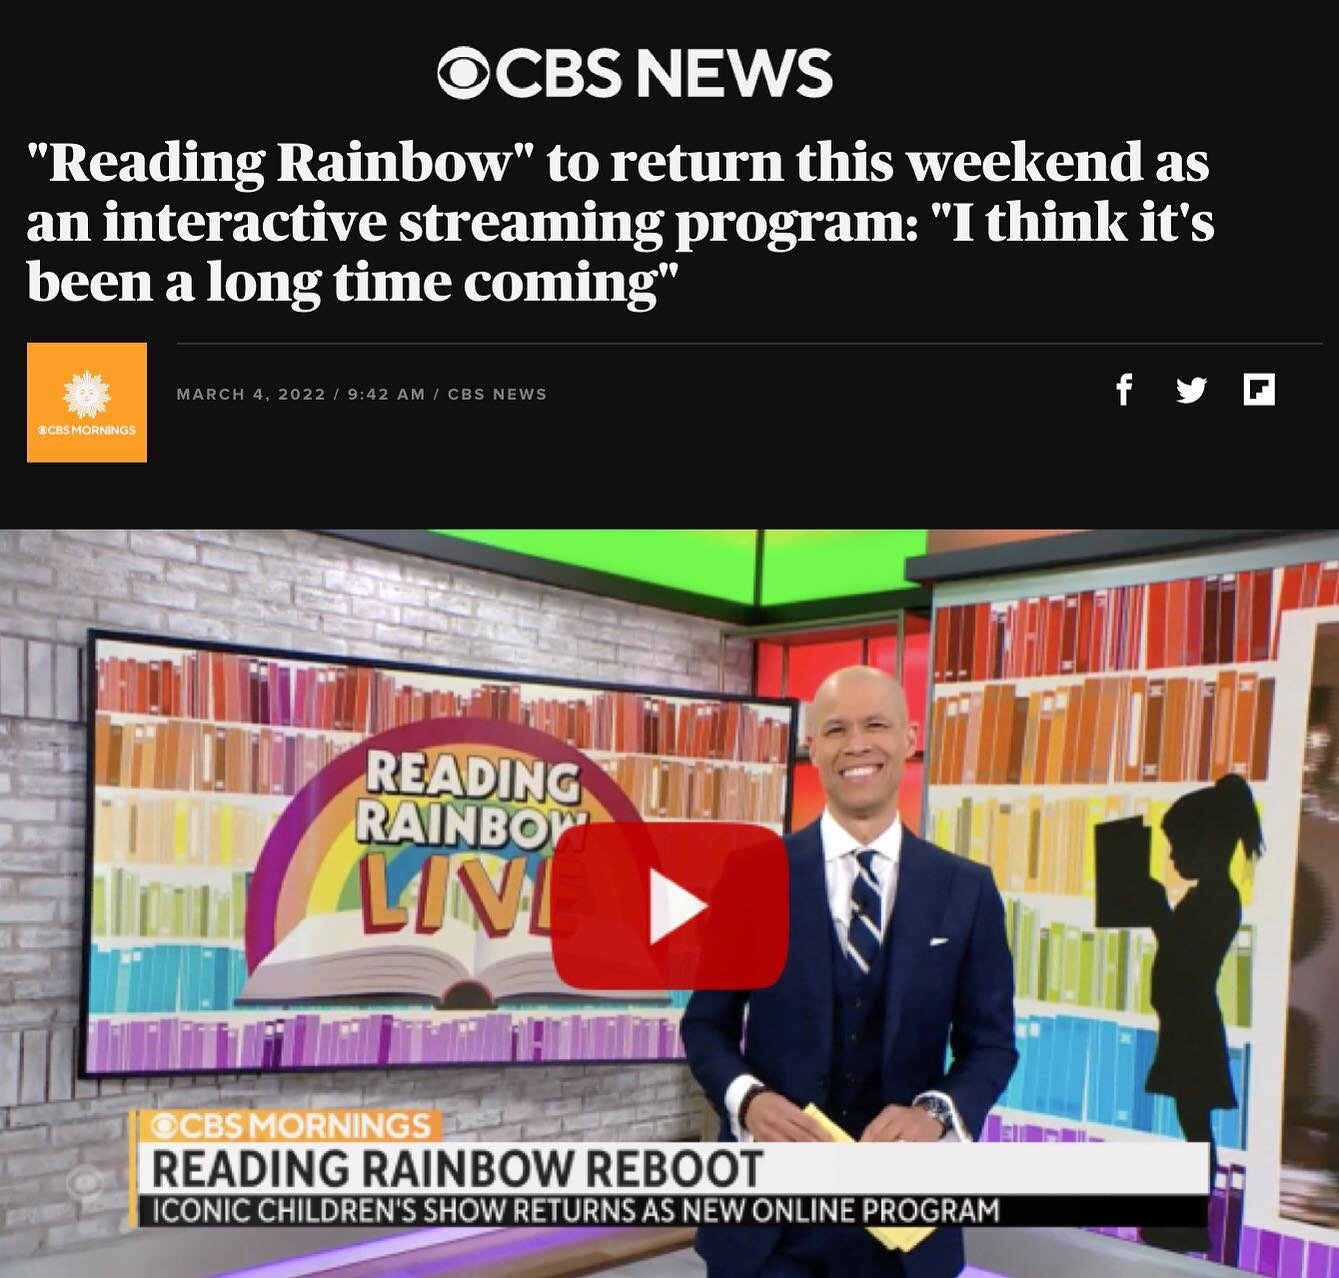 &ldquo;This weekend, the classic television show &mdash; which went off the air more than a decade ago &mdash; returns as an interactive streaming program called &ldquo;@readingrainbowlive,&rdquo; @cbsnews' @vladduthierscbs reports. &ldquo;The show m